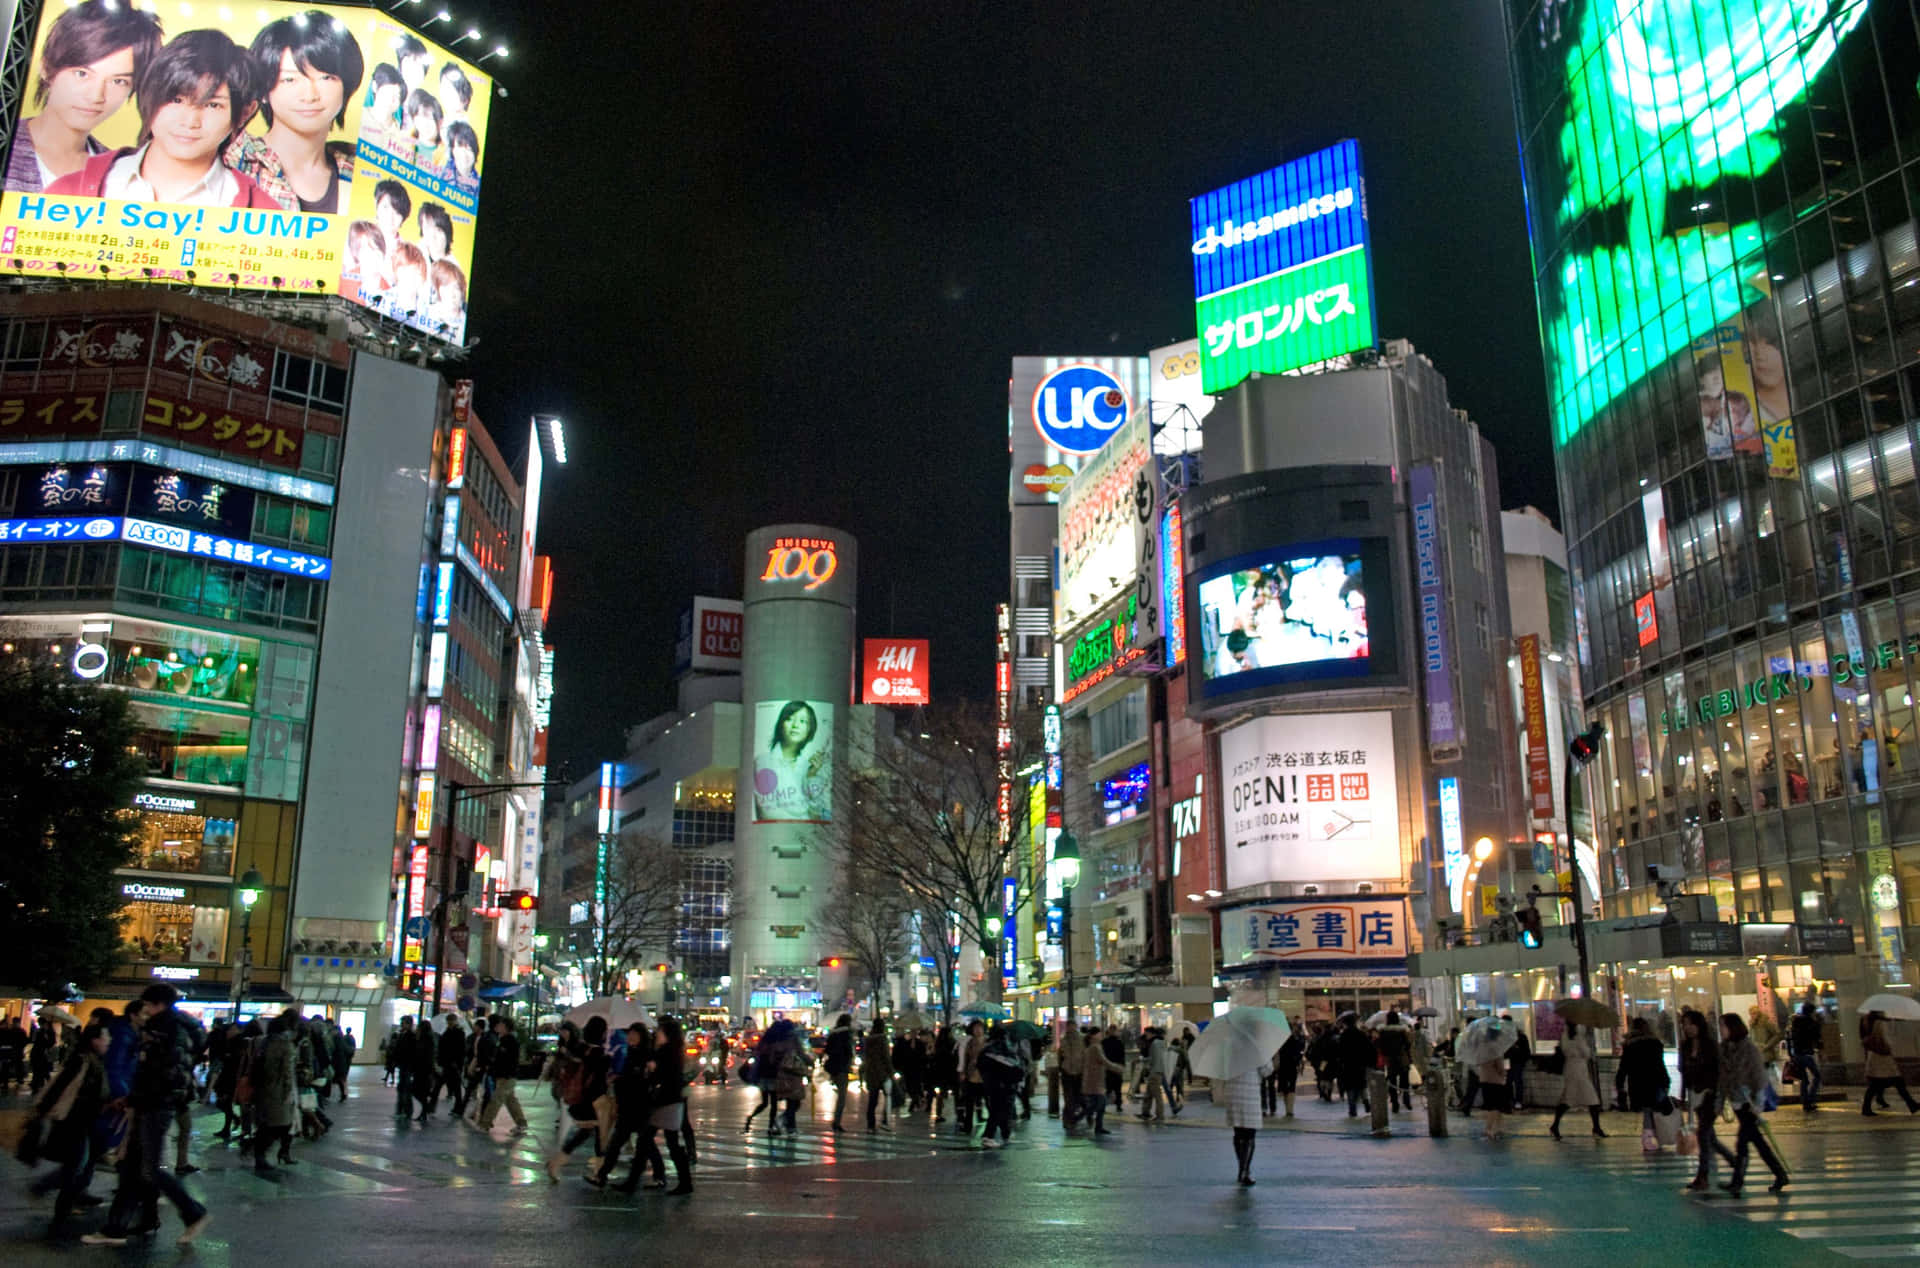 The bustle of Tokyo's lively streets